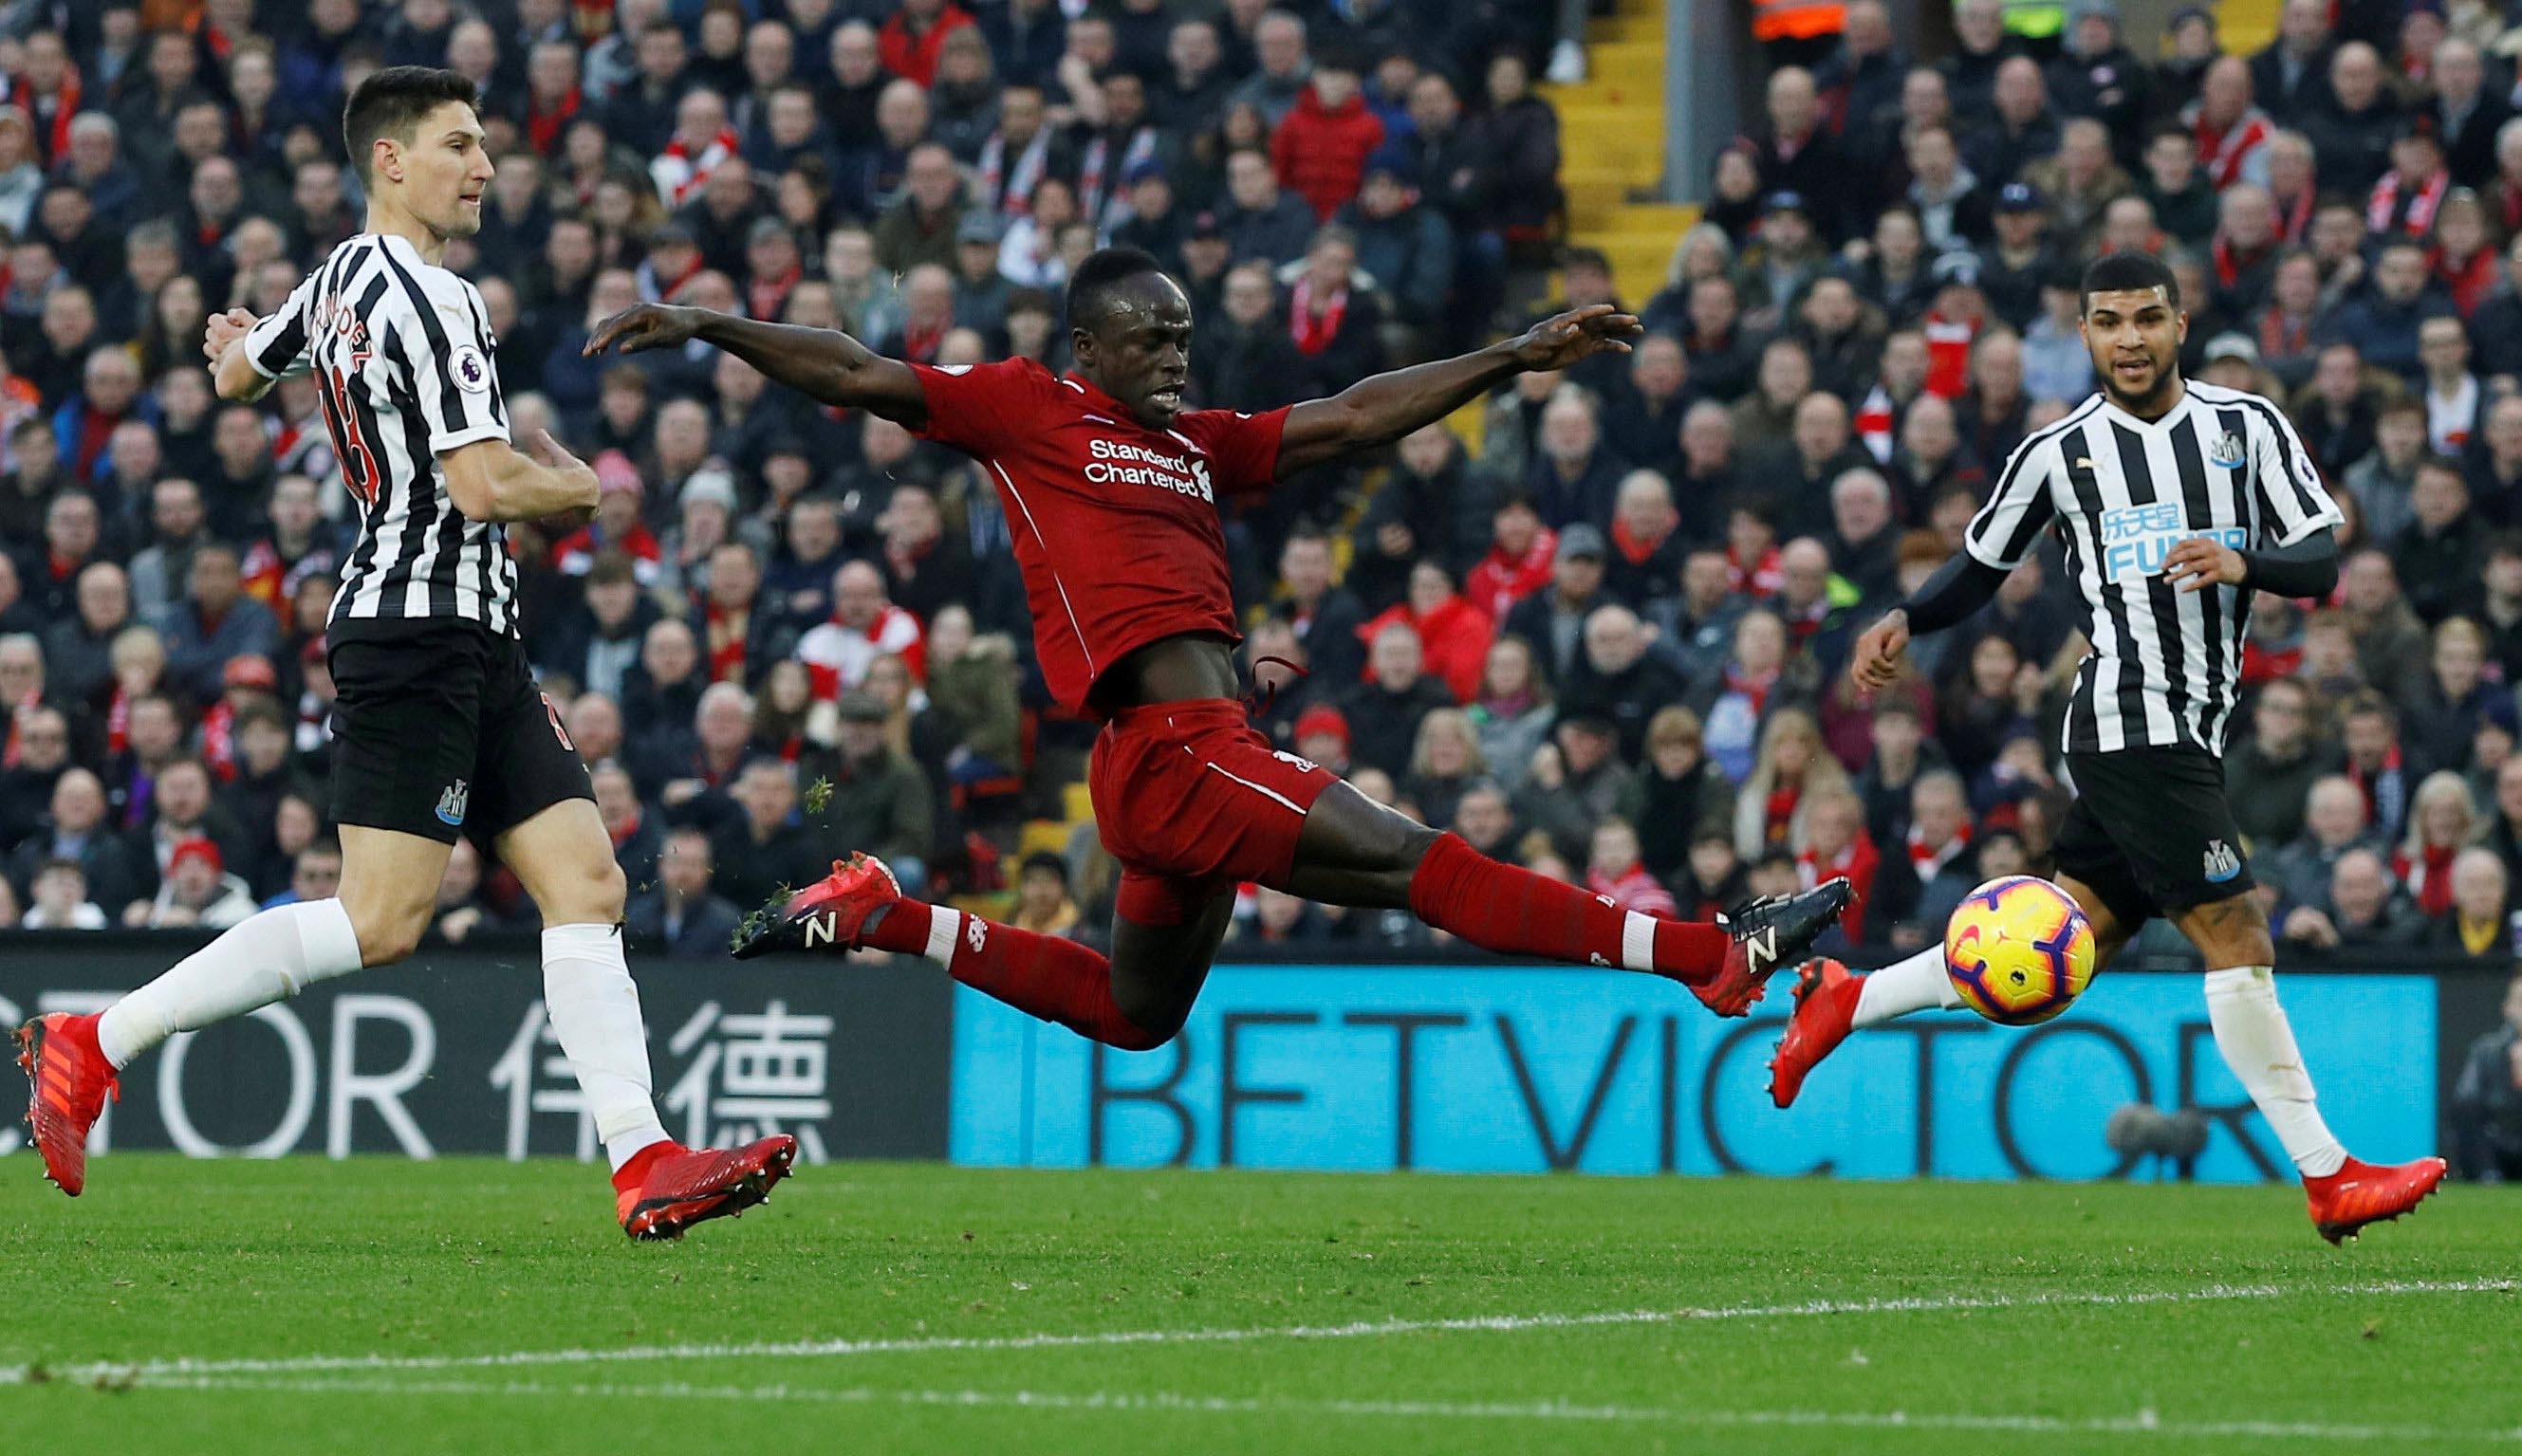 Liverpool's Sadio Mane in action during the Premier League match between Liverpool and Newcastle United, at Anfield, in Liverpool, Britain, on December 26, 2018. Photo: Reuters